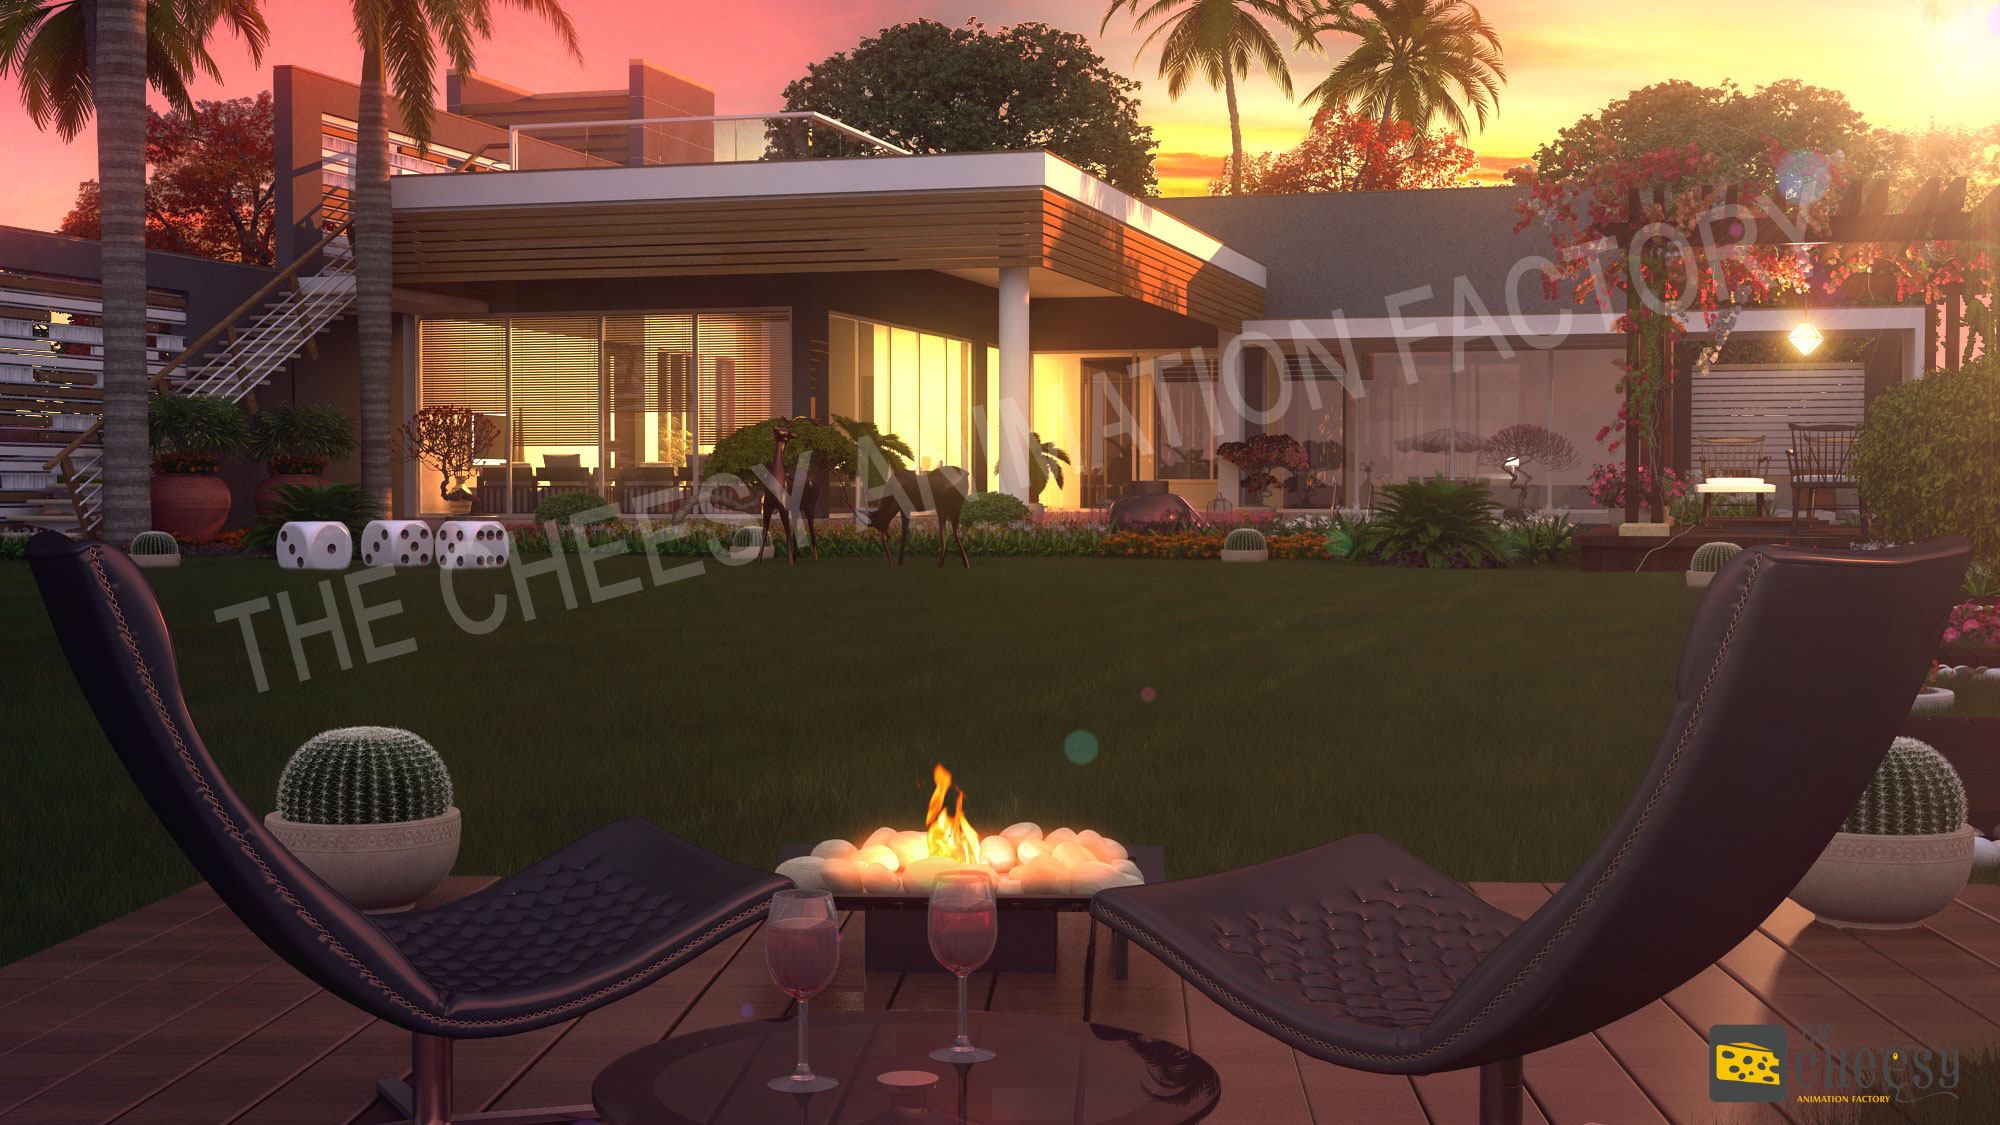 The Cheesy Service Is Word Best 3D Walkthrough Studio. Our Company Creates High Resolution 3D Architectural Walkthrough, 3D Walkthrough Video,DVD.